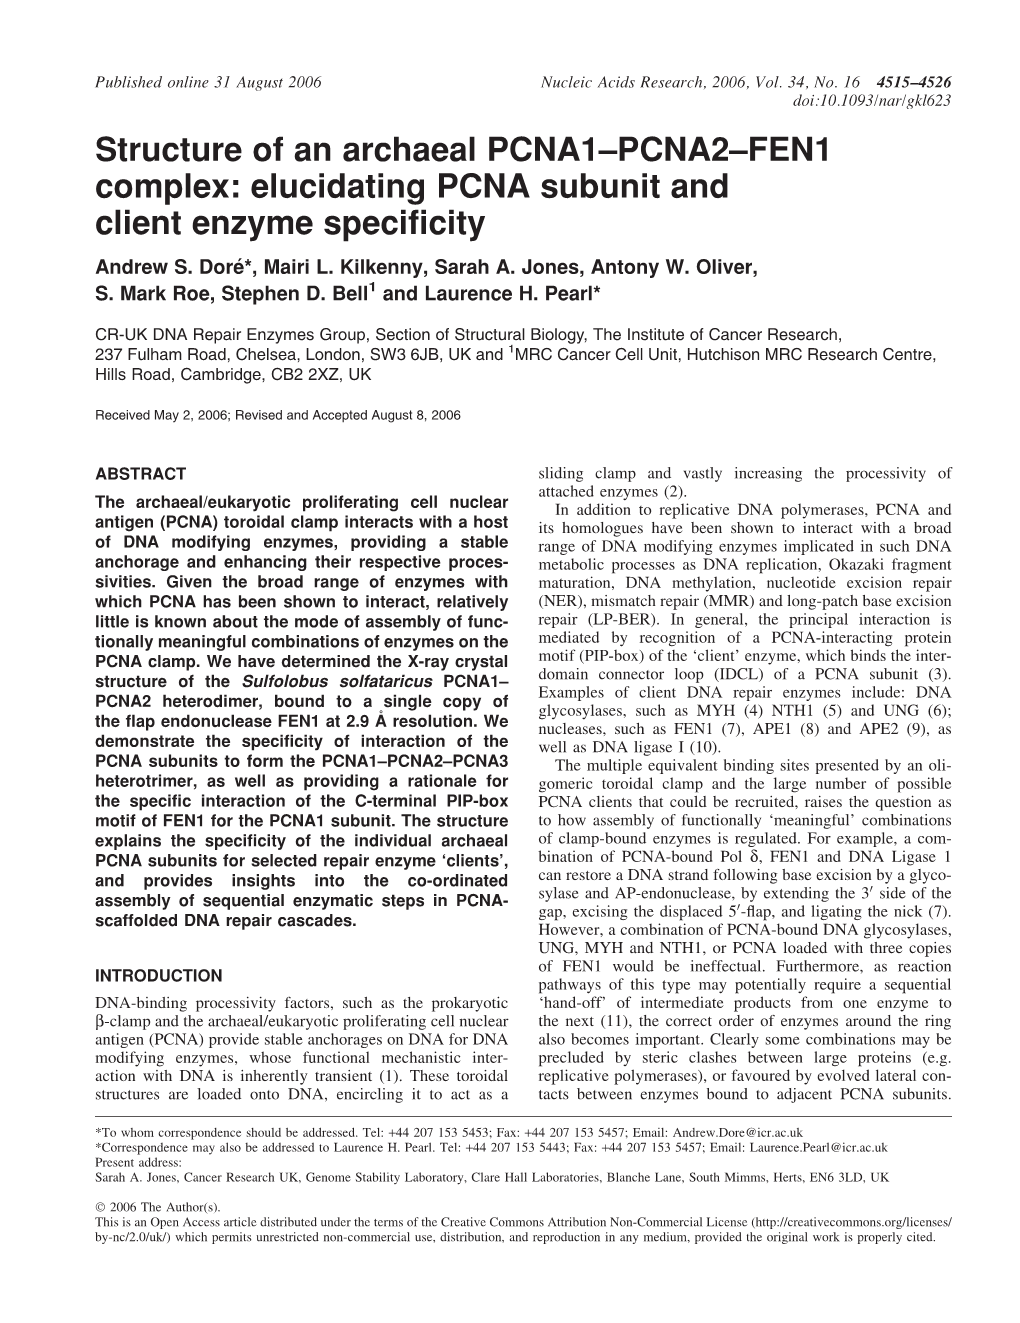 Structure of an Archaeal PCNA1–PCNA2–FEN1 Complex: Elucidating PCNA Subunit and Client Enzyme Specificity Andrew S